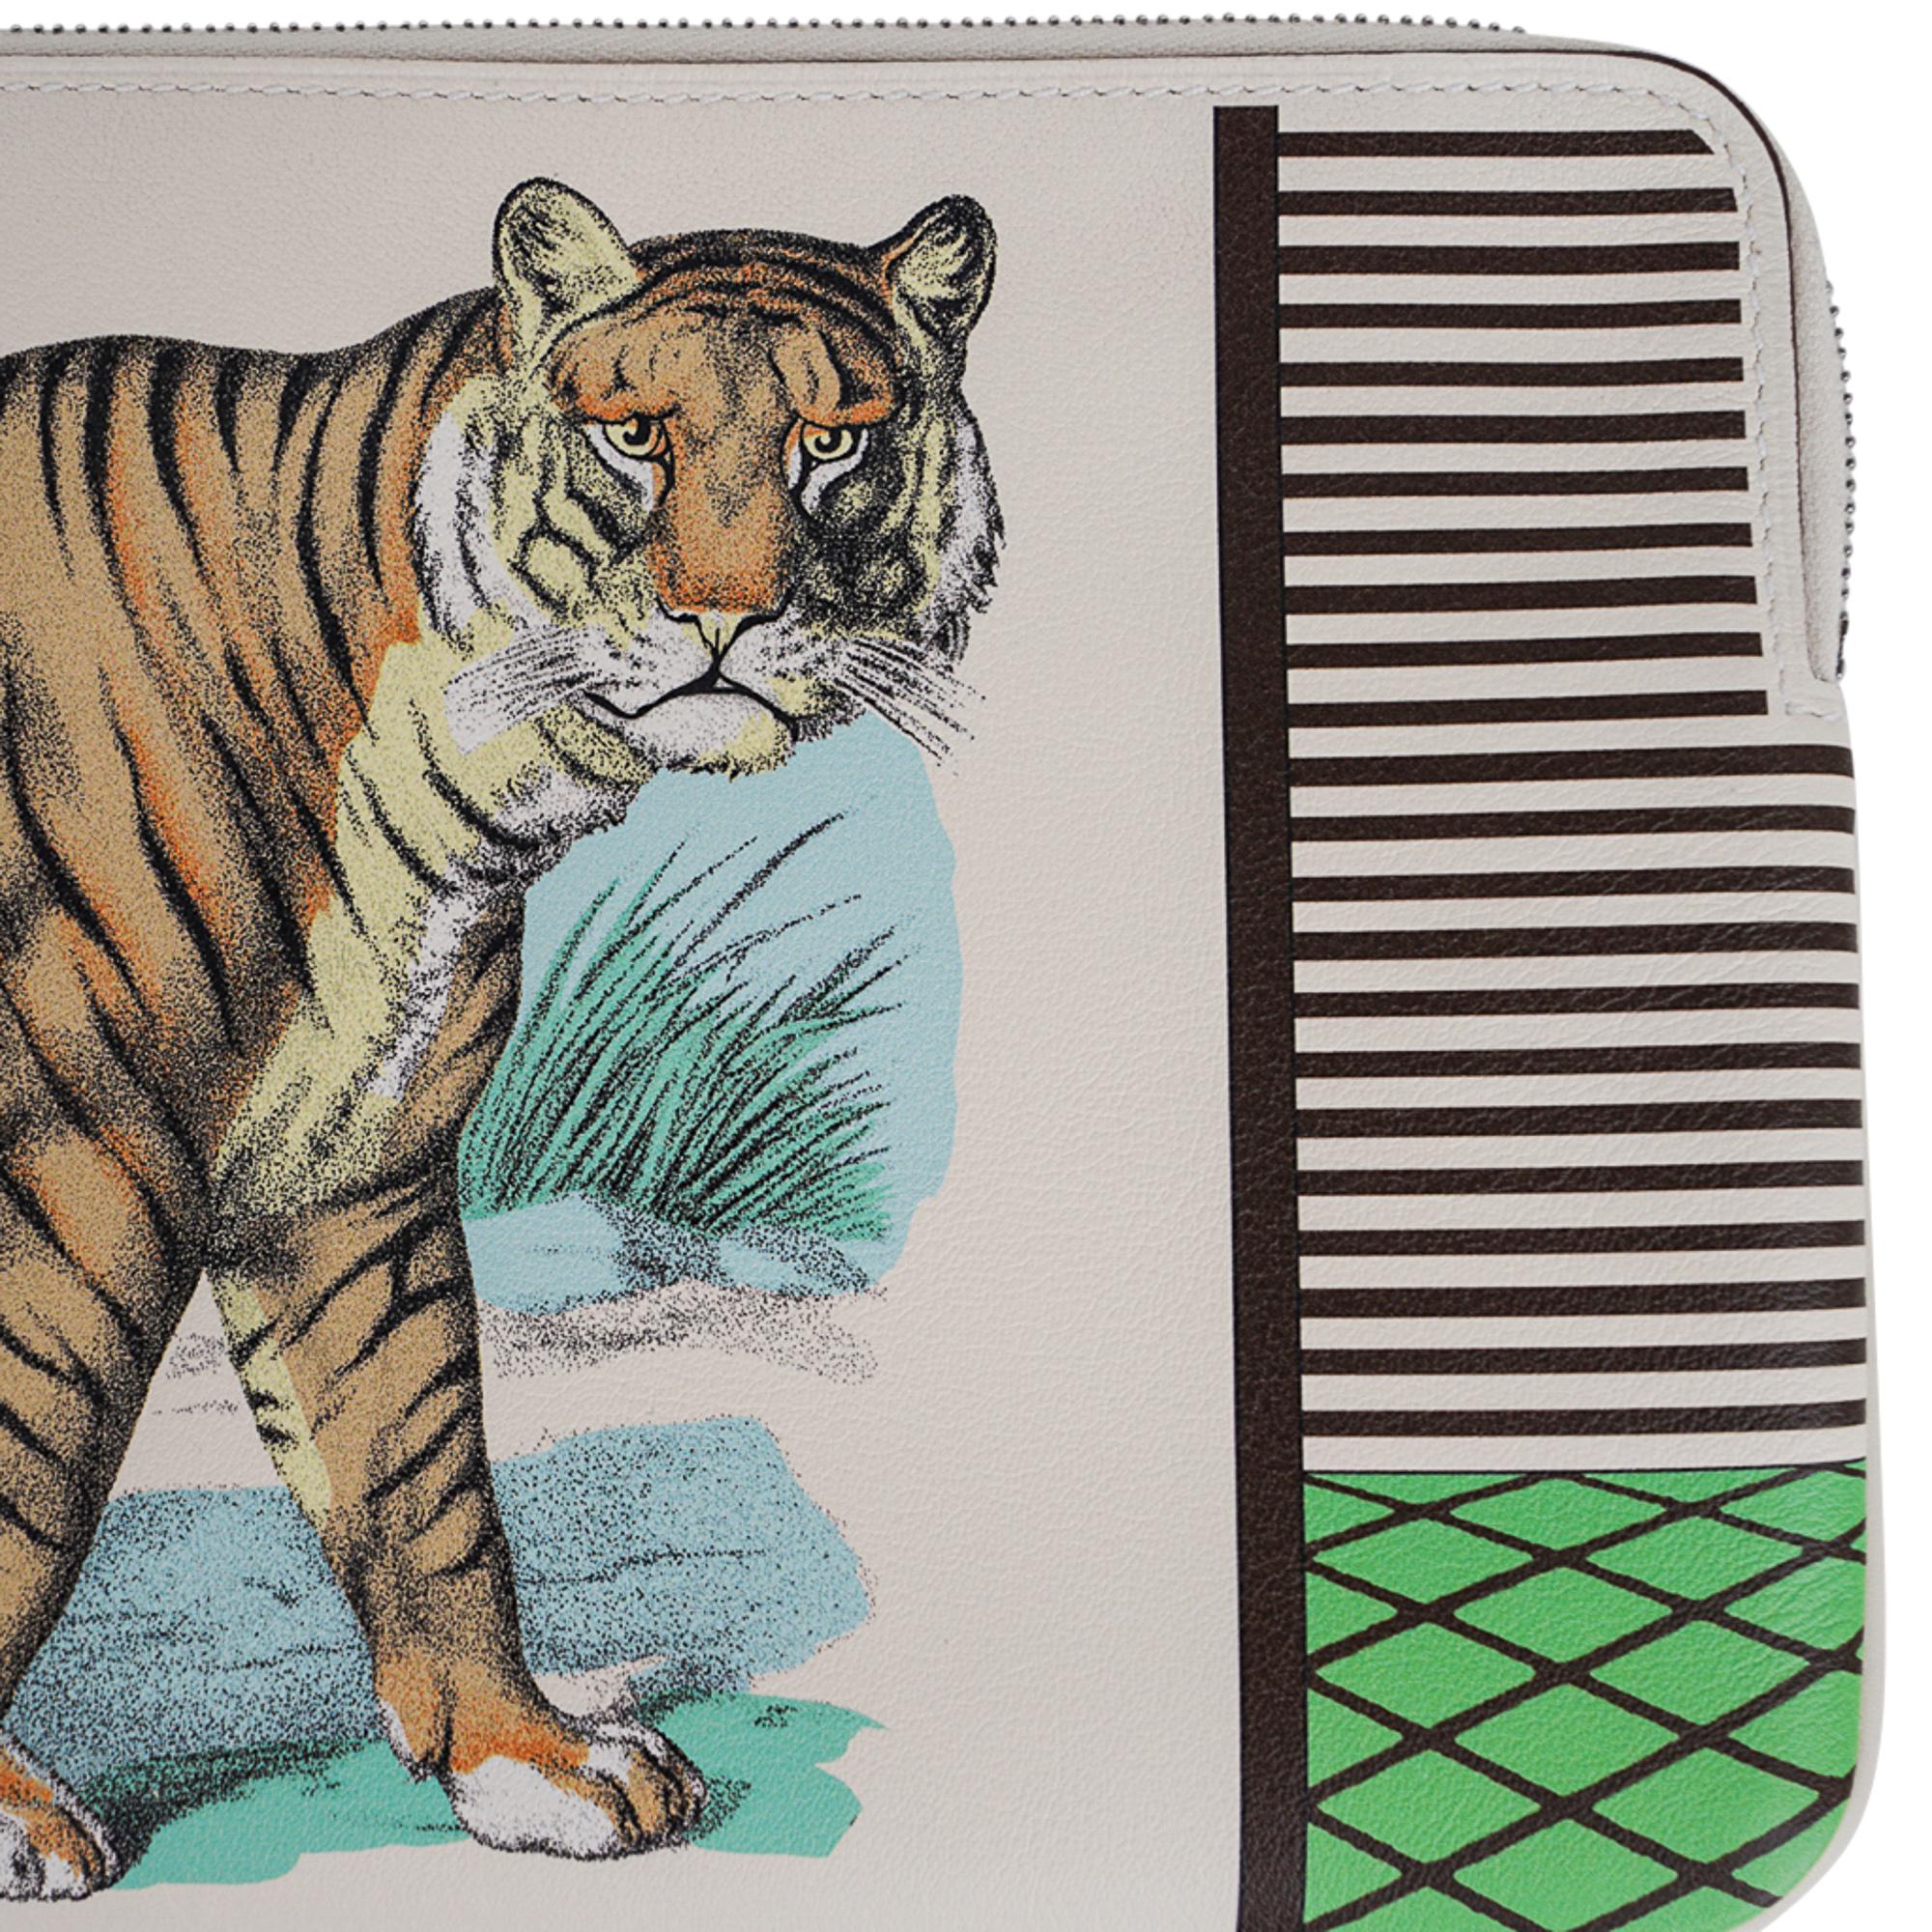 Mightychic offers a limited edition Limited edition Hermes Carre Pocket Long Pouch
featured in Le Grand Theatre Nouveau.
Tigre detail printed Swift leather.
Beautiful in Nata and Multicolor.
Designed by Gianpaolo Pagni.
Pouch has 1 credit card slot